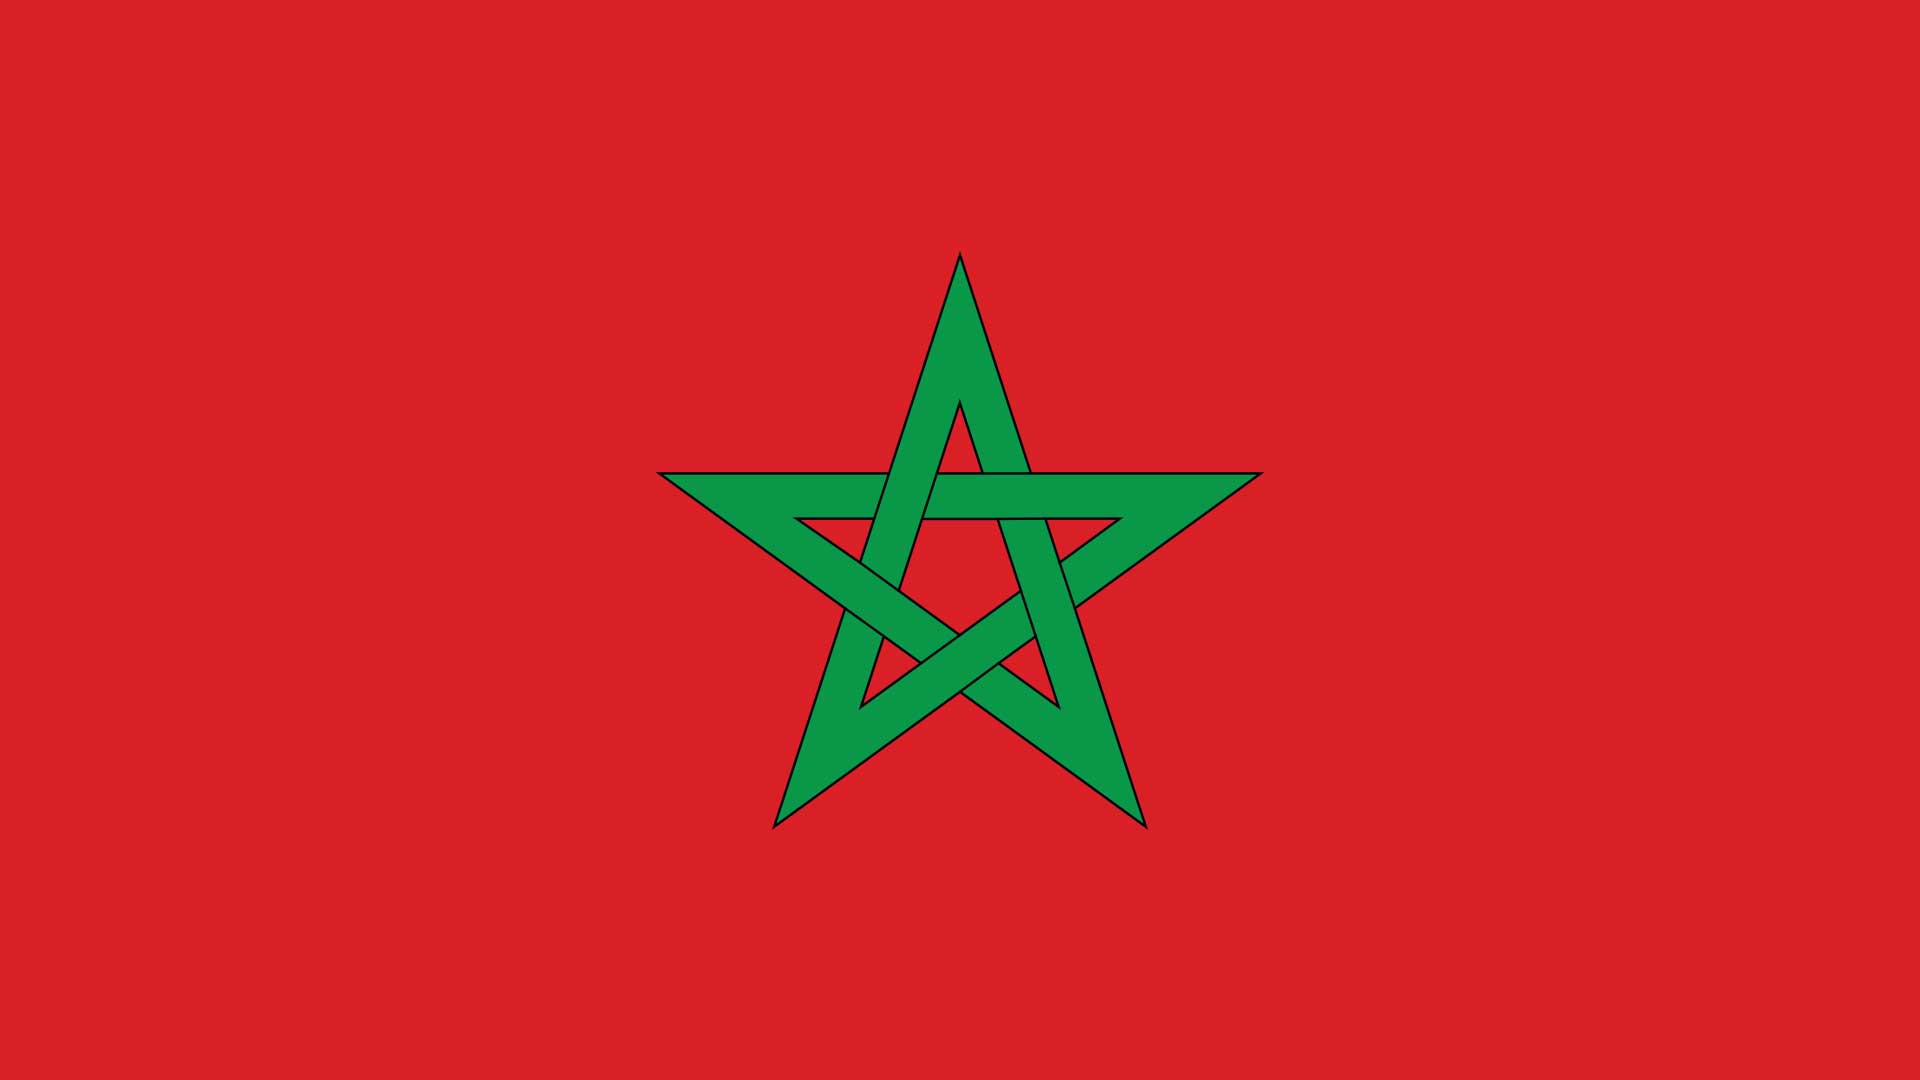 A red flag with a green star shape